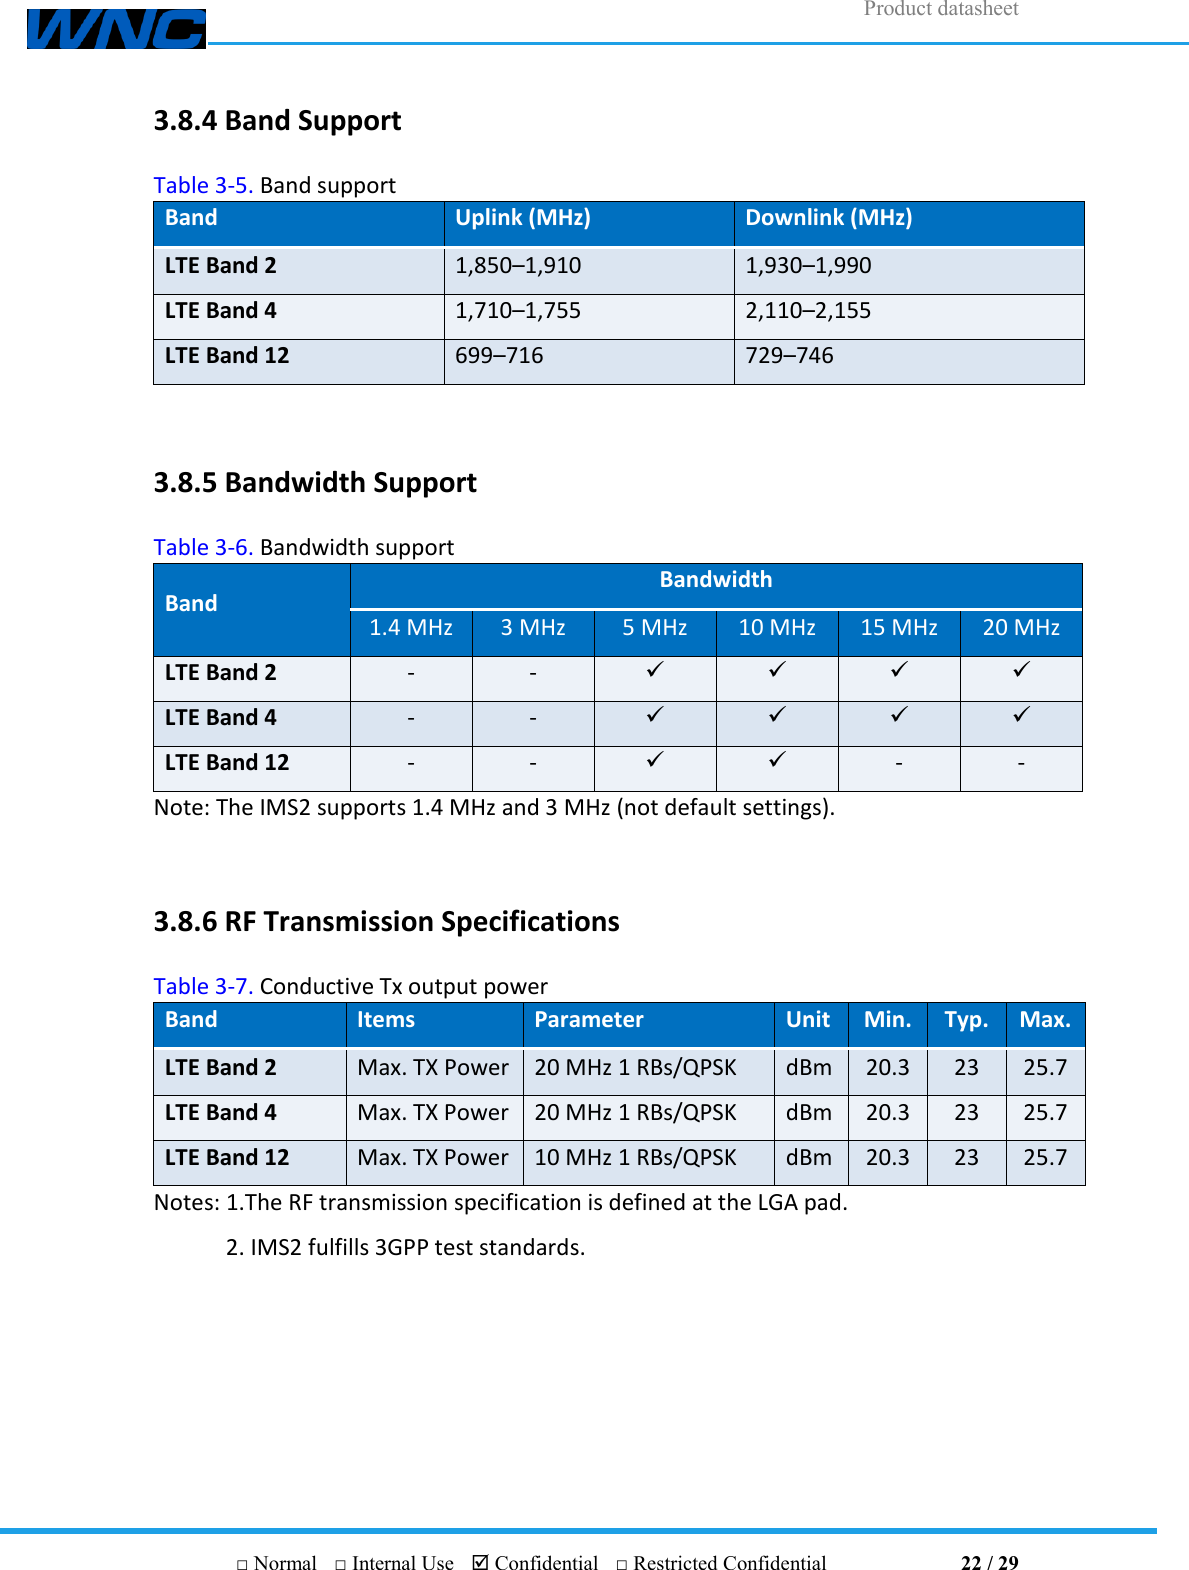 Product datasheet       □ Normal  □ Internal Use   Confidential  □ Restricted Confidential                                22 / 29 3.8.4 Band Support Table 3-5. Band support Band Uplink (MHz) Downlink (MHz) LTE Band 2 1,850–1,910 1,930–1,990 LTE Band 4 1,710–1,755 2,110–2,155 LTE Band 12 699–716 729–746   3.8.5 Bandwidth Support Table 3-6. Bandwidth support Band Bandwidth 1.4 MHz 3 MHz 5 MHz 10 MHz 15 MHz 20 MHz LTE Band 2 - -     LTE Band 4 - -     LTE Band 12 - -   - - Note: The IMS2 supports 1.4 MHz and 3 MHz (not default settings).     3.8.6 RF Transmission Specifications Table 3-7. Conductive Tx output power Band Items Parameter Unit Min. Typ. Max. LTE Band 2 Max. TX Power 20 MHz 1 RBs/QPSK dBm 20.3 23 25.7 LTE Band 4 Max. TX Power 20 MHz 1 RBs/QPSK dBm 20.3 23 25.7 LTE Band 12 Max. TX Power 10 MHz 1 RBs/QPSK dBm 20.3 23 25.7 Notes: 1.The RF transmission specification is defined at the LGA pad. 2. IMS2 fulfills 3GPP test standards.  